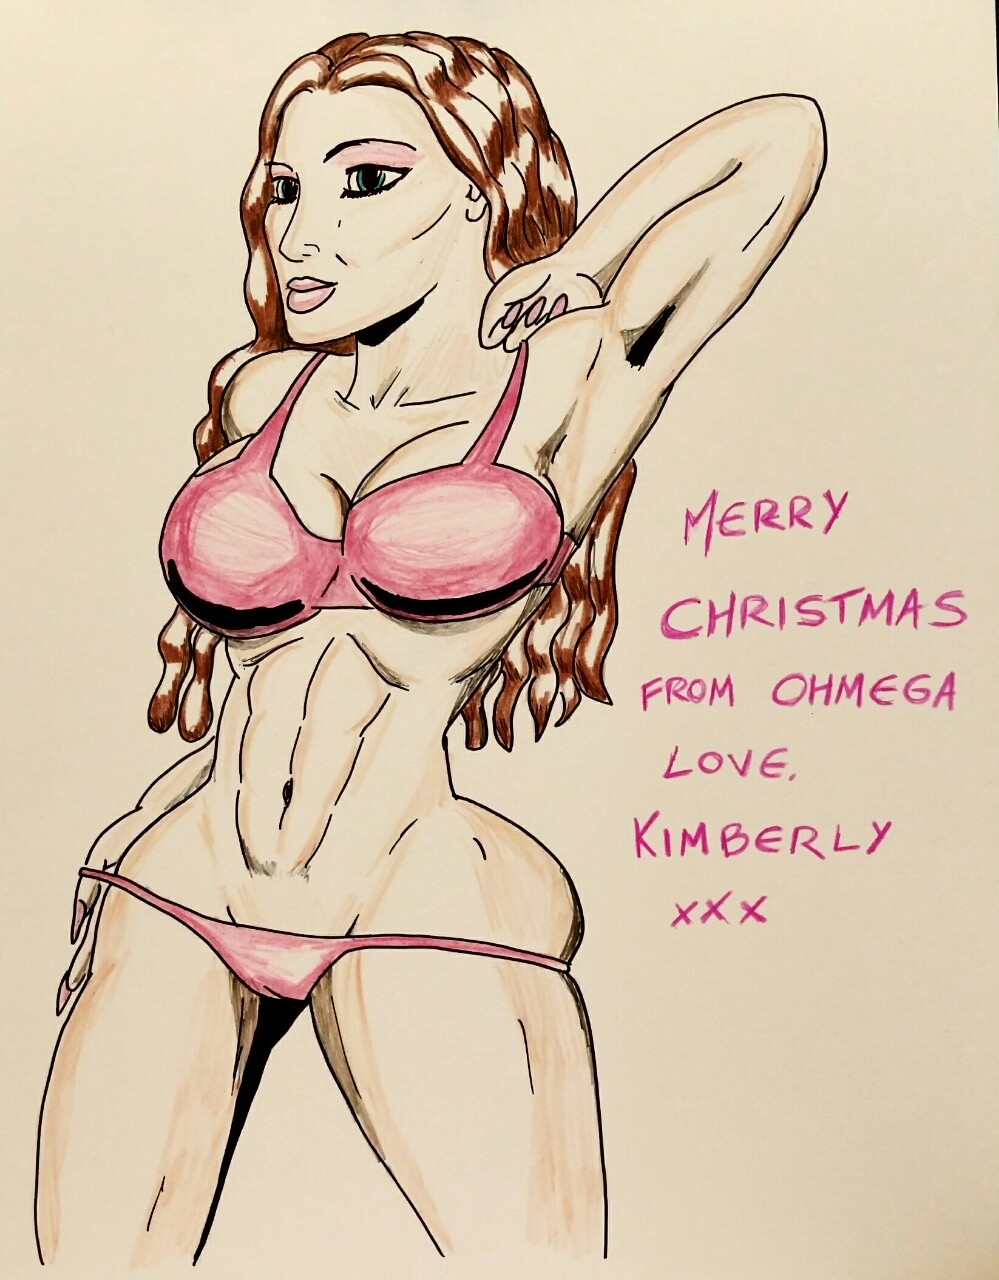 Ohmega’s Christmas Wishes  From Kimberly and all the staff at Ohmega, wishing you